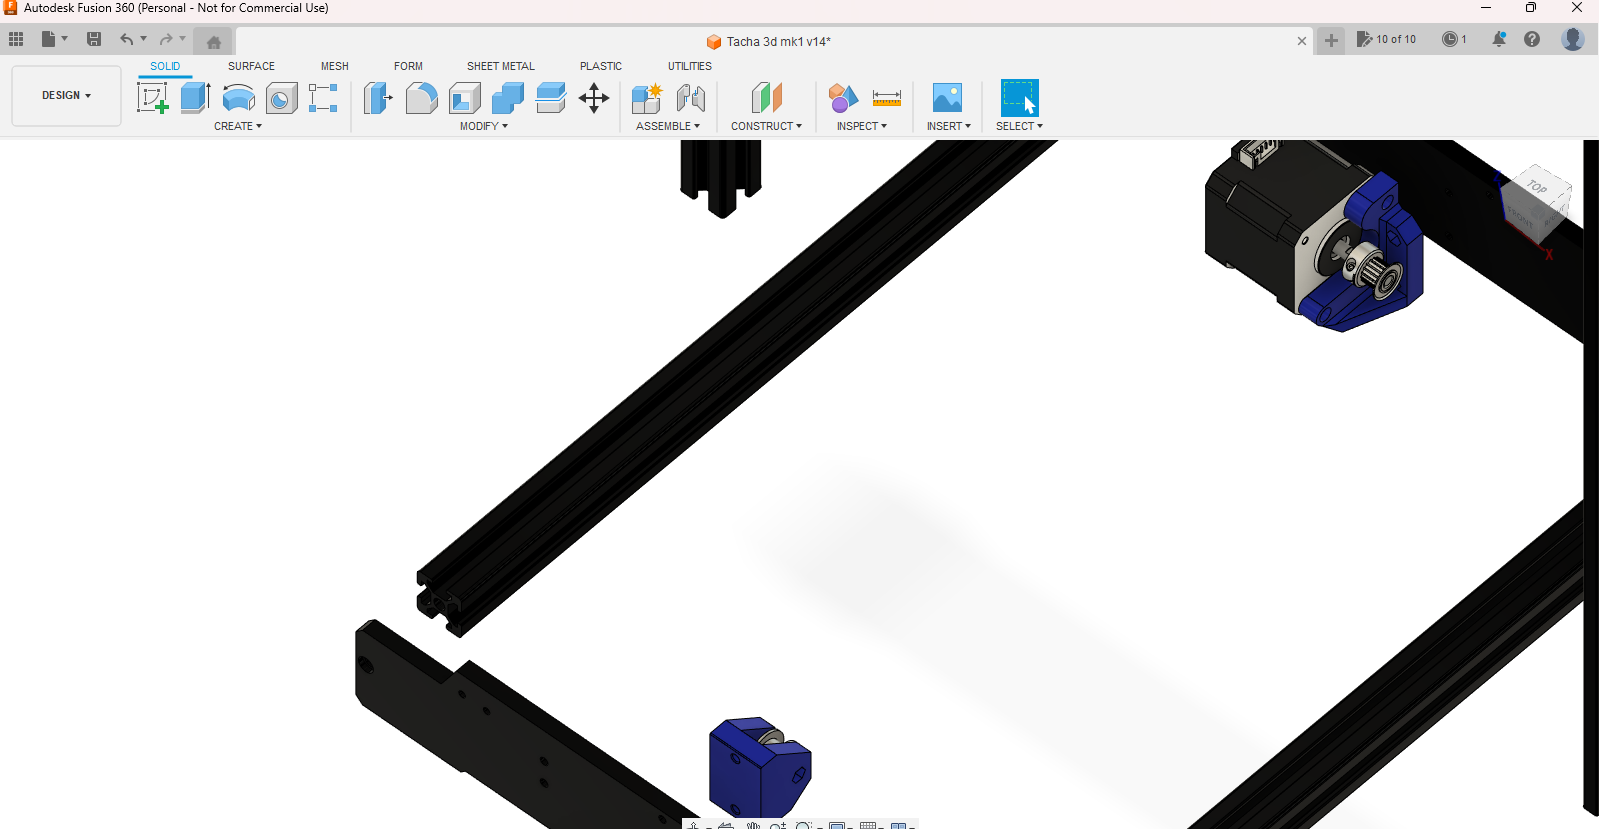 Autodesk Fusion 360 (Personal - Not for Commercial Use) 6_30_2023 9_15_46 PM.png